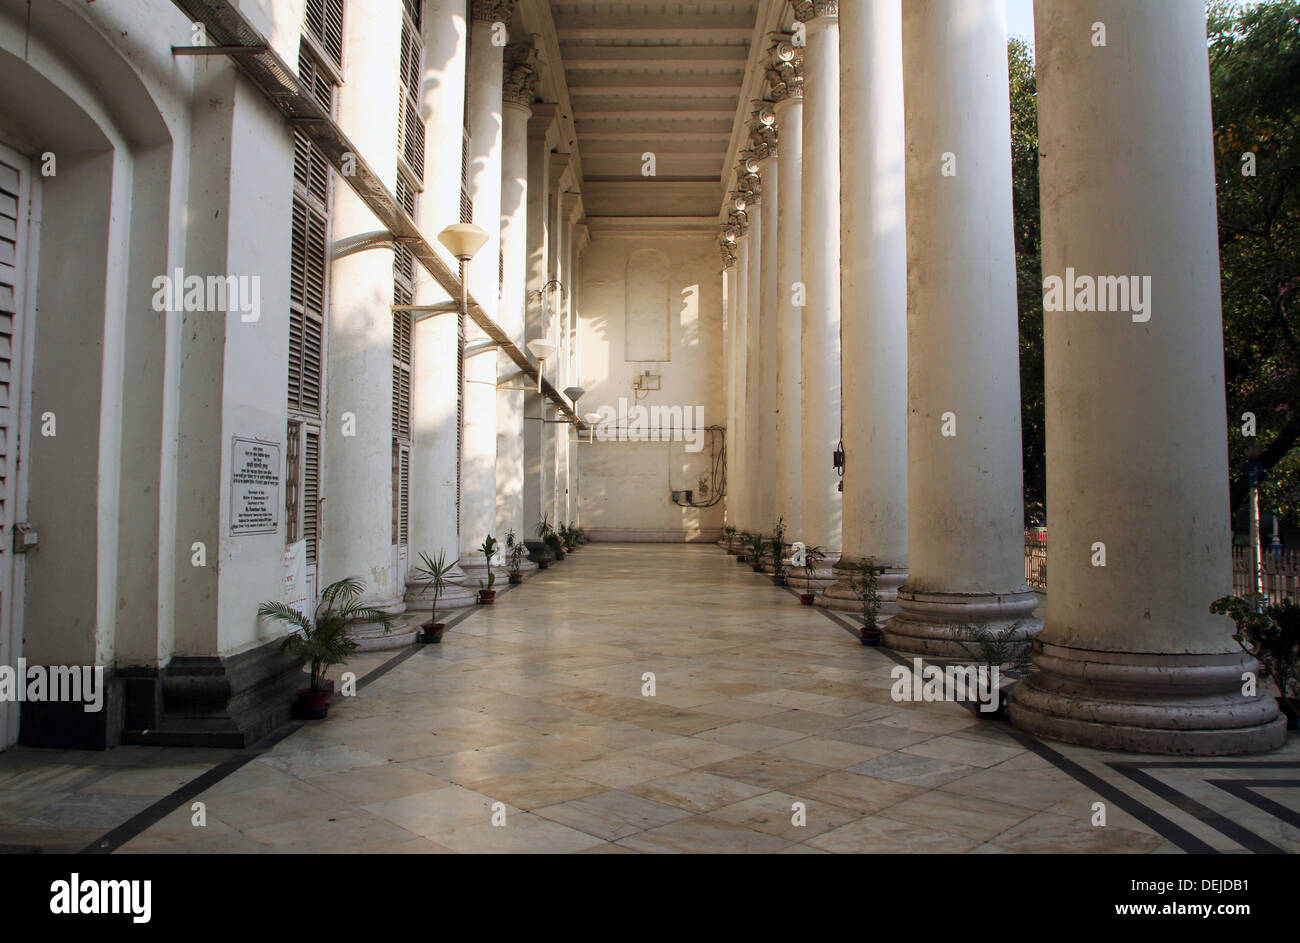 General Post Office of West Bengal on Nov 25, 2012 in Kolkata, India. Stock Photo